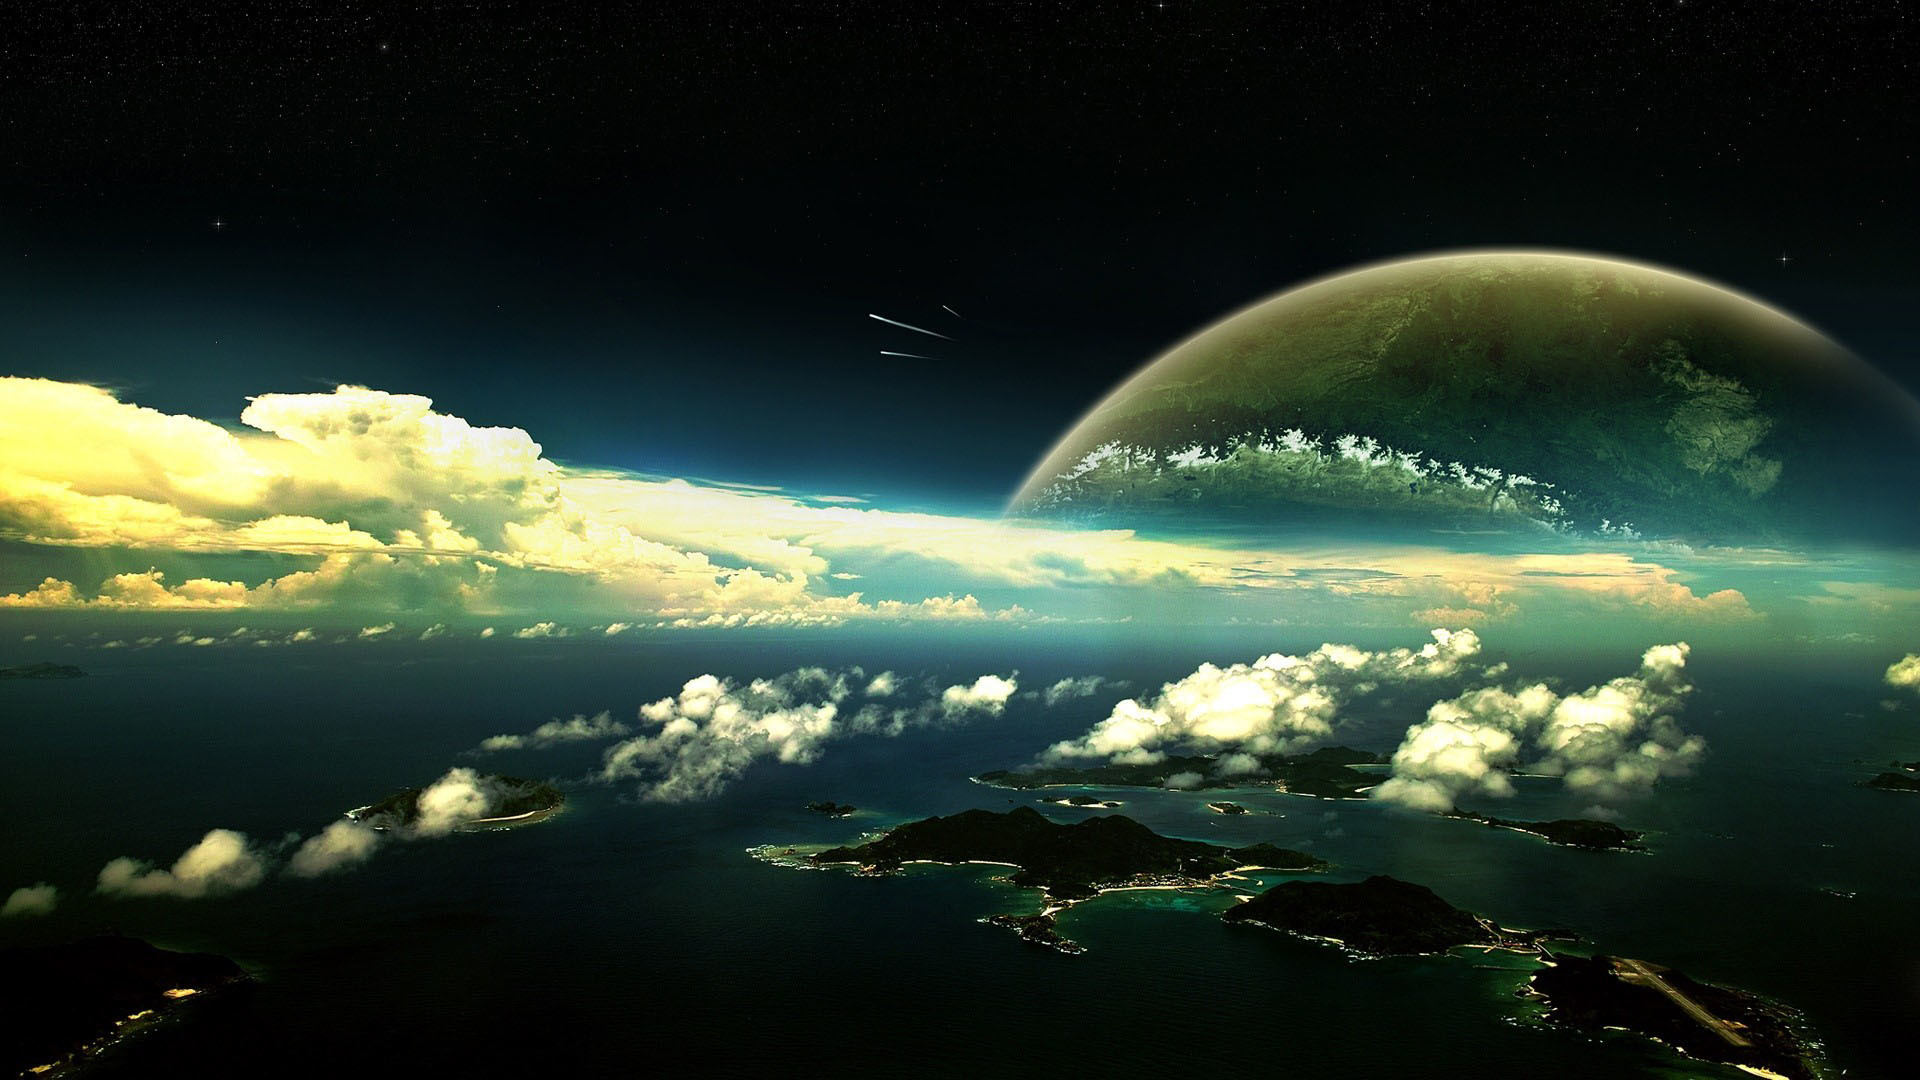 1920x1080 free Outer Space wallpaper, resolution : 1920 x tags: Outer, Space,  Planets, Cosmos.